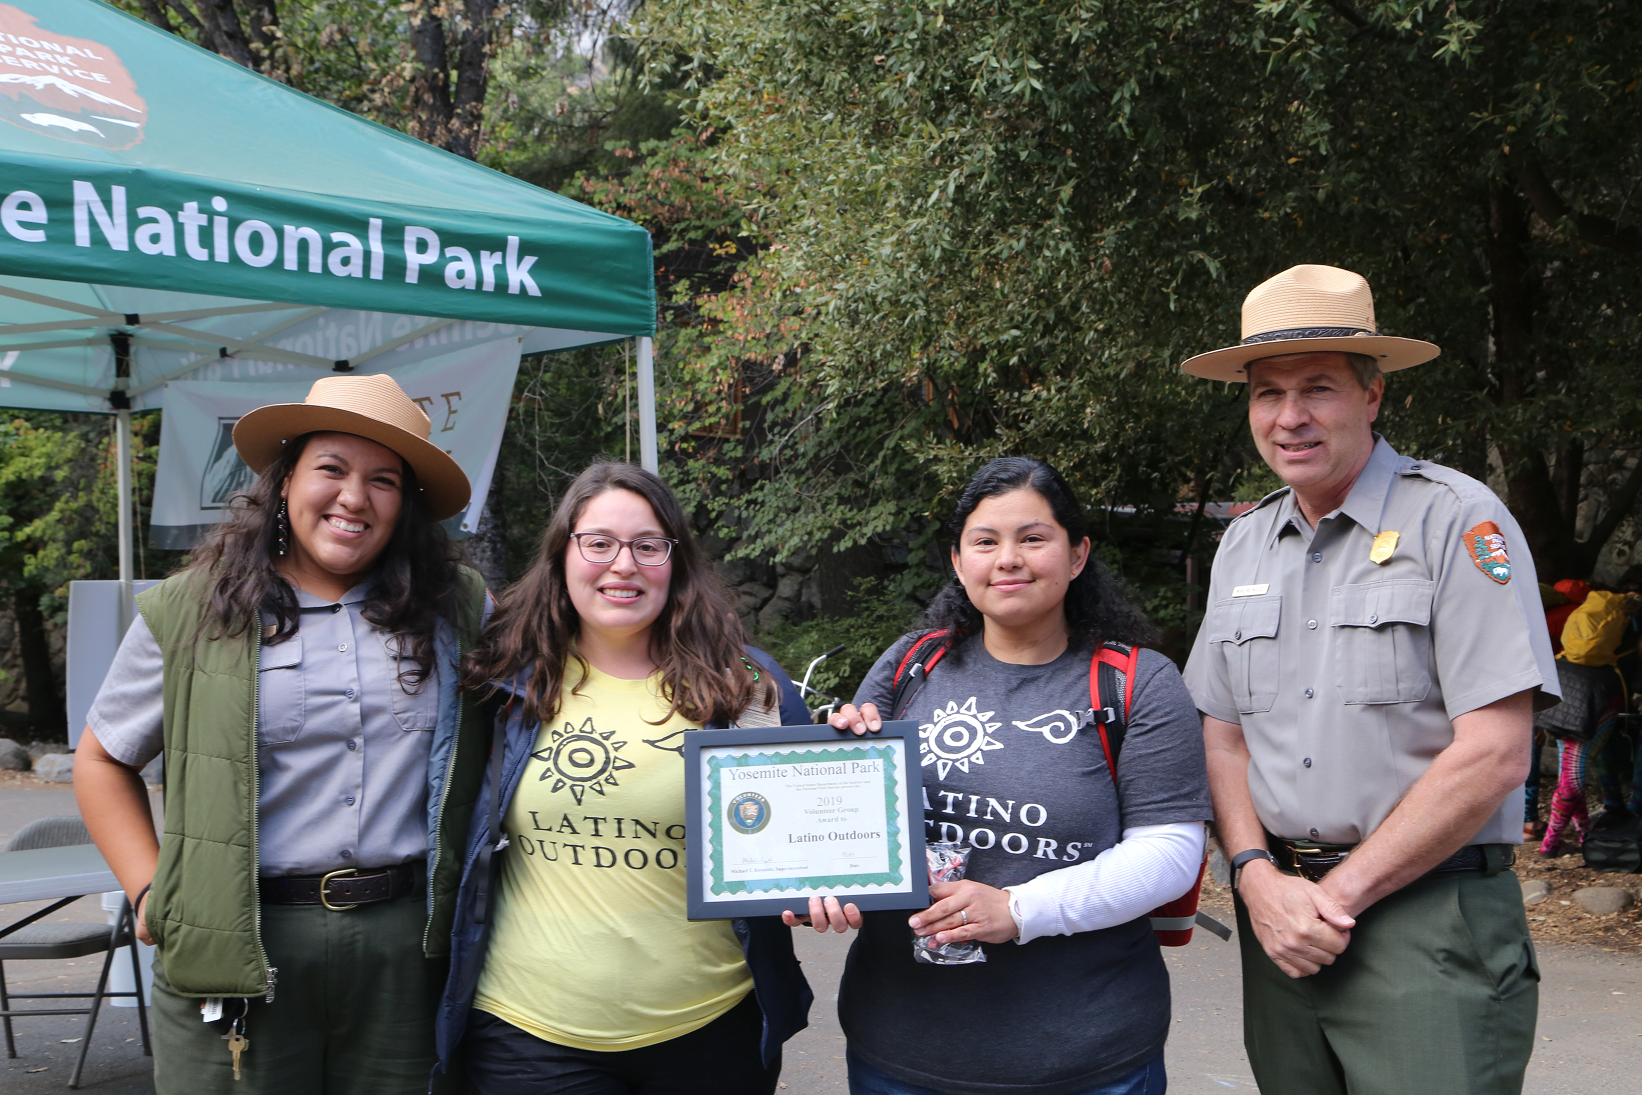 Two people with "Latino Outoors" shirts hold an award, standing between two NPS rangers in uniform, including Sandy Hernandez.